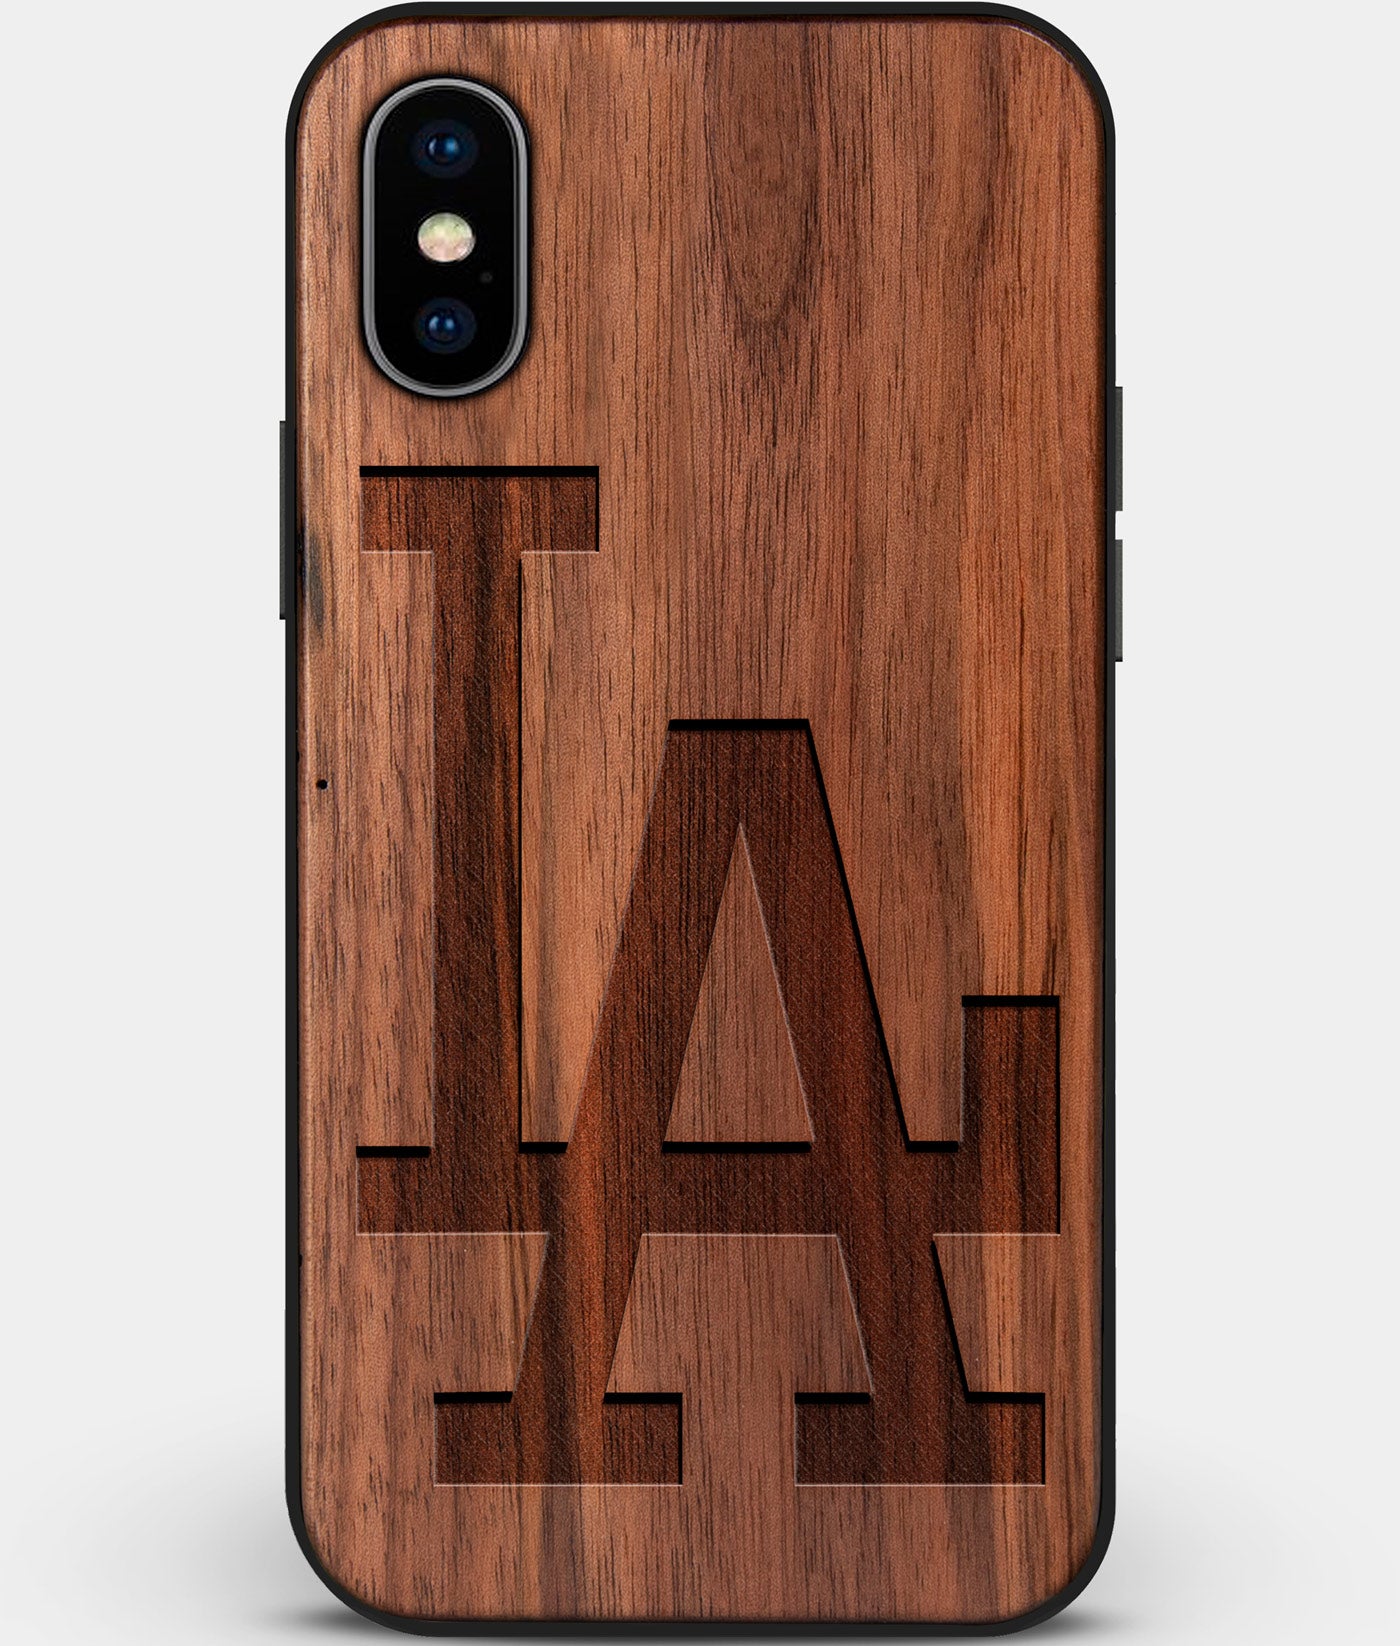 Custom Carved Wood Los Angeles Dodgers iPhone X/XS Case Classic | Personalized Walnut Wood Los Angeles Dodgers Cover, Birthday Gift, Gifts For Him, Monogrammed Gift For Fan | by Engraved In Nature